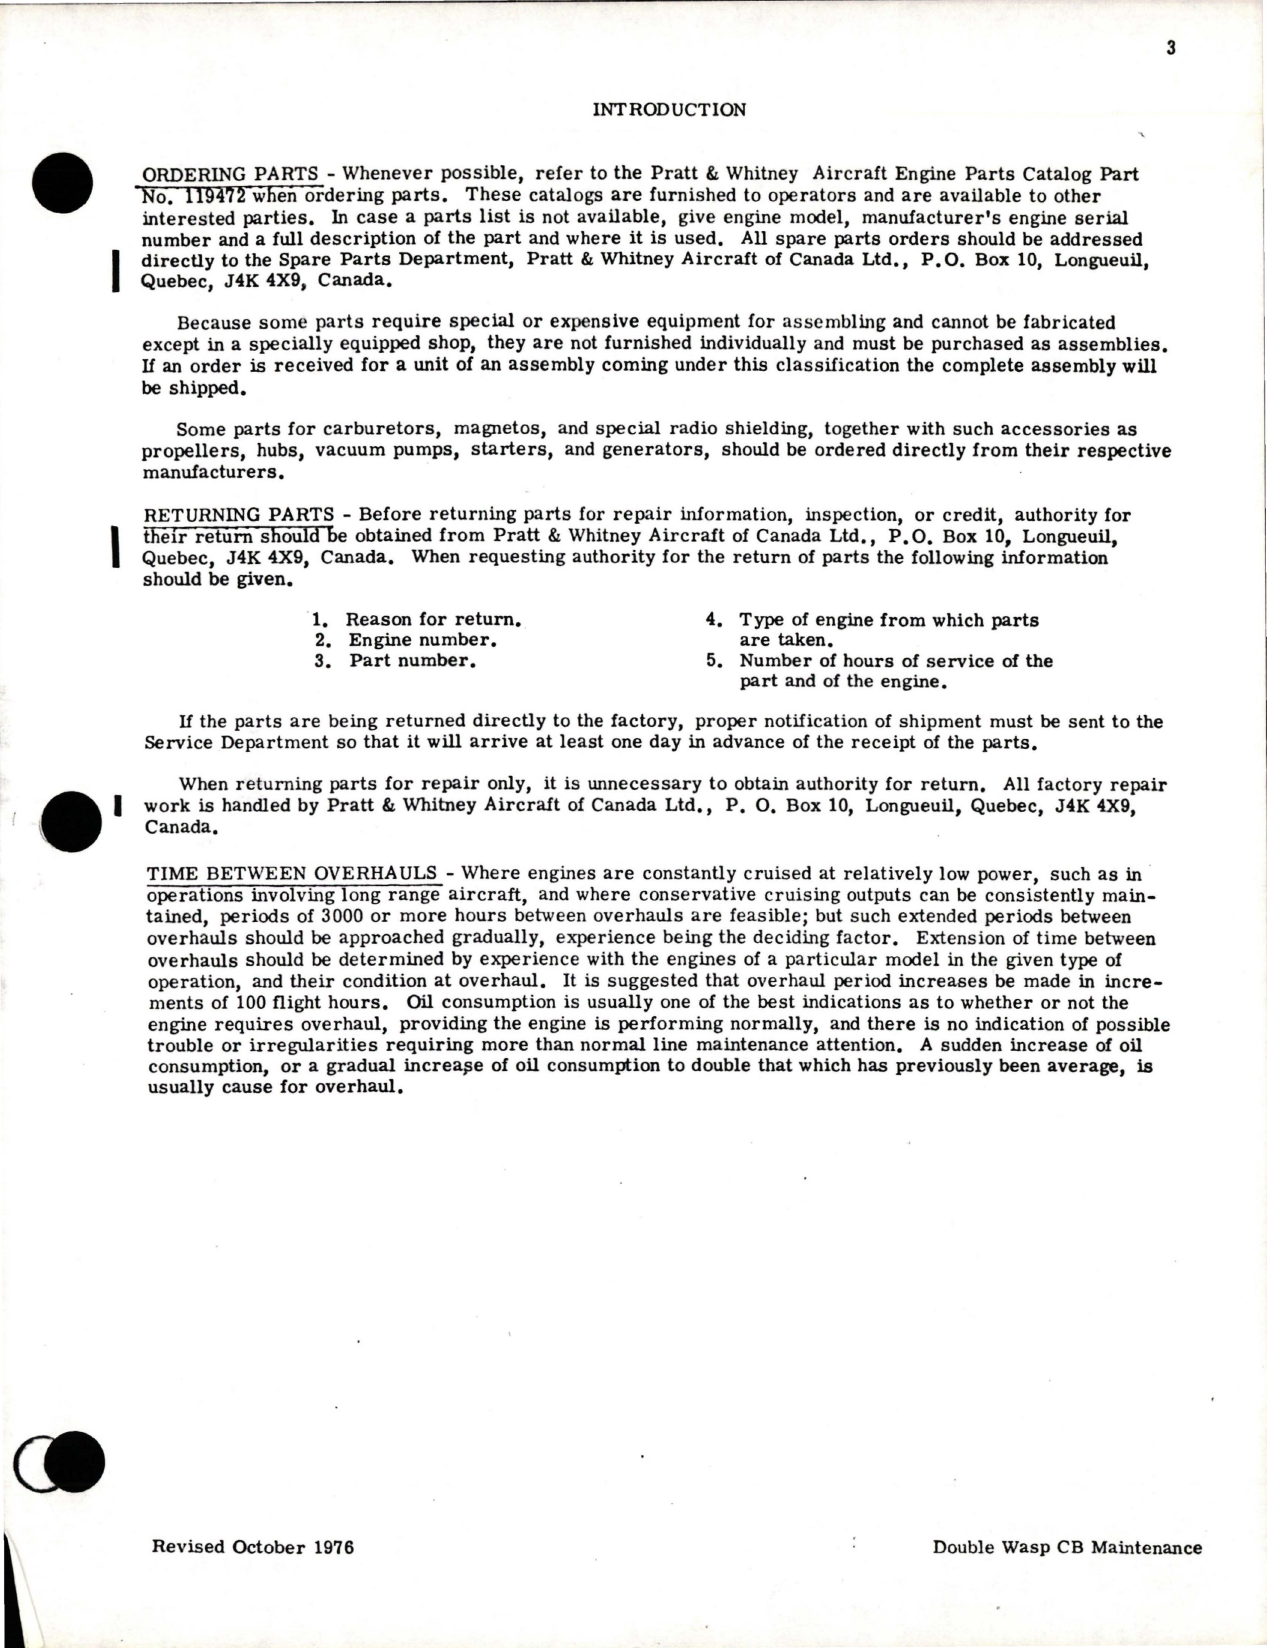 Sample page 9 from AirCorps Library document: Maintenance Manual for Double Wasp CB Series - Part 166498